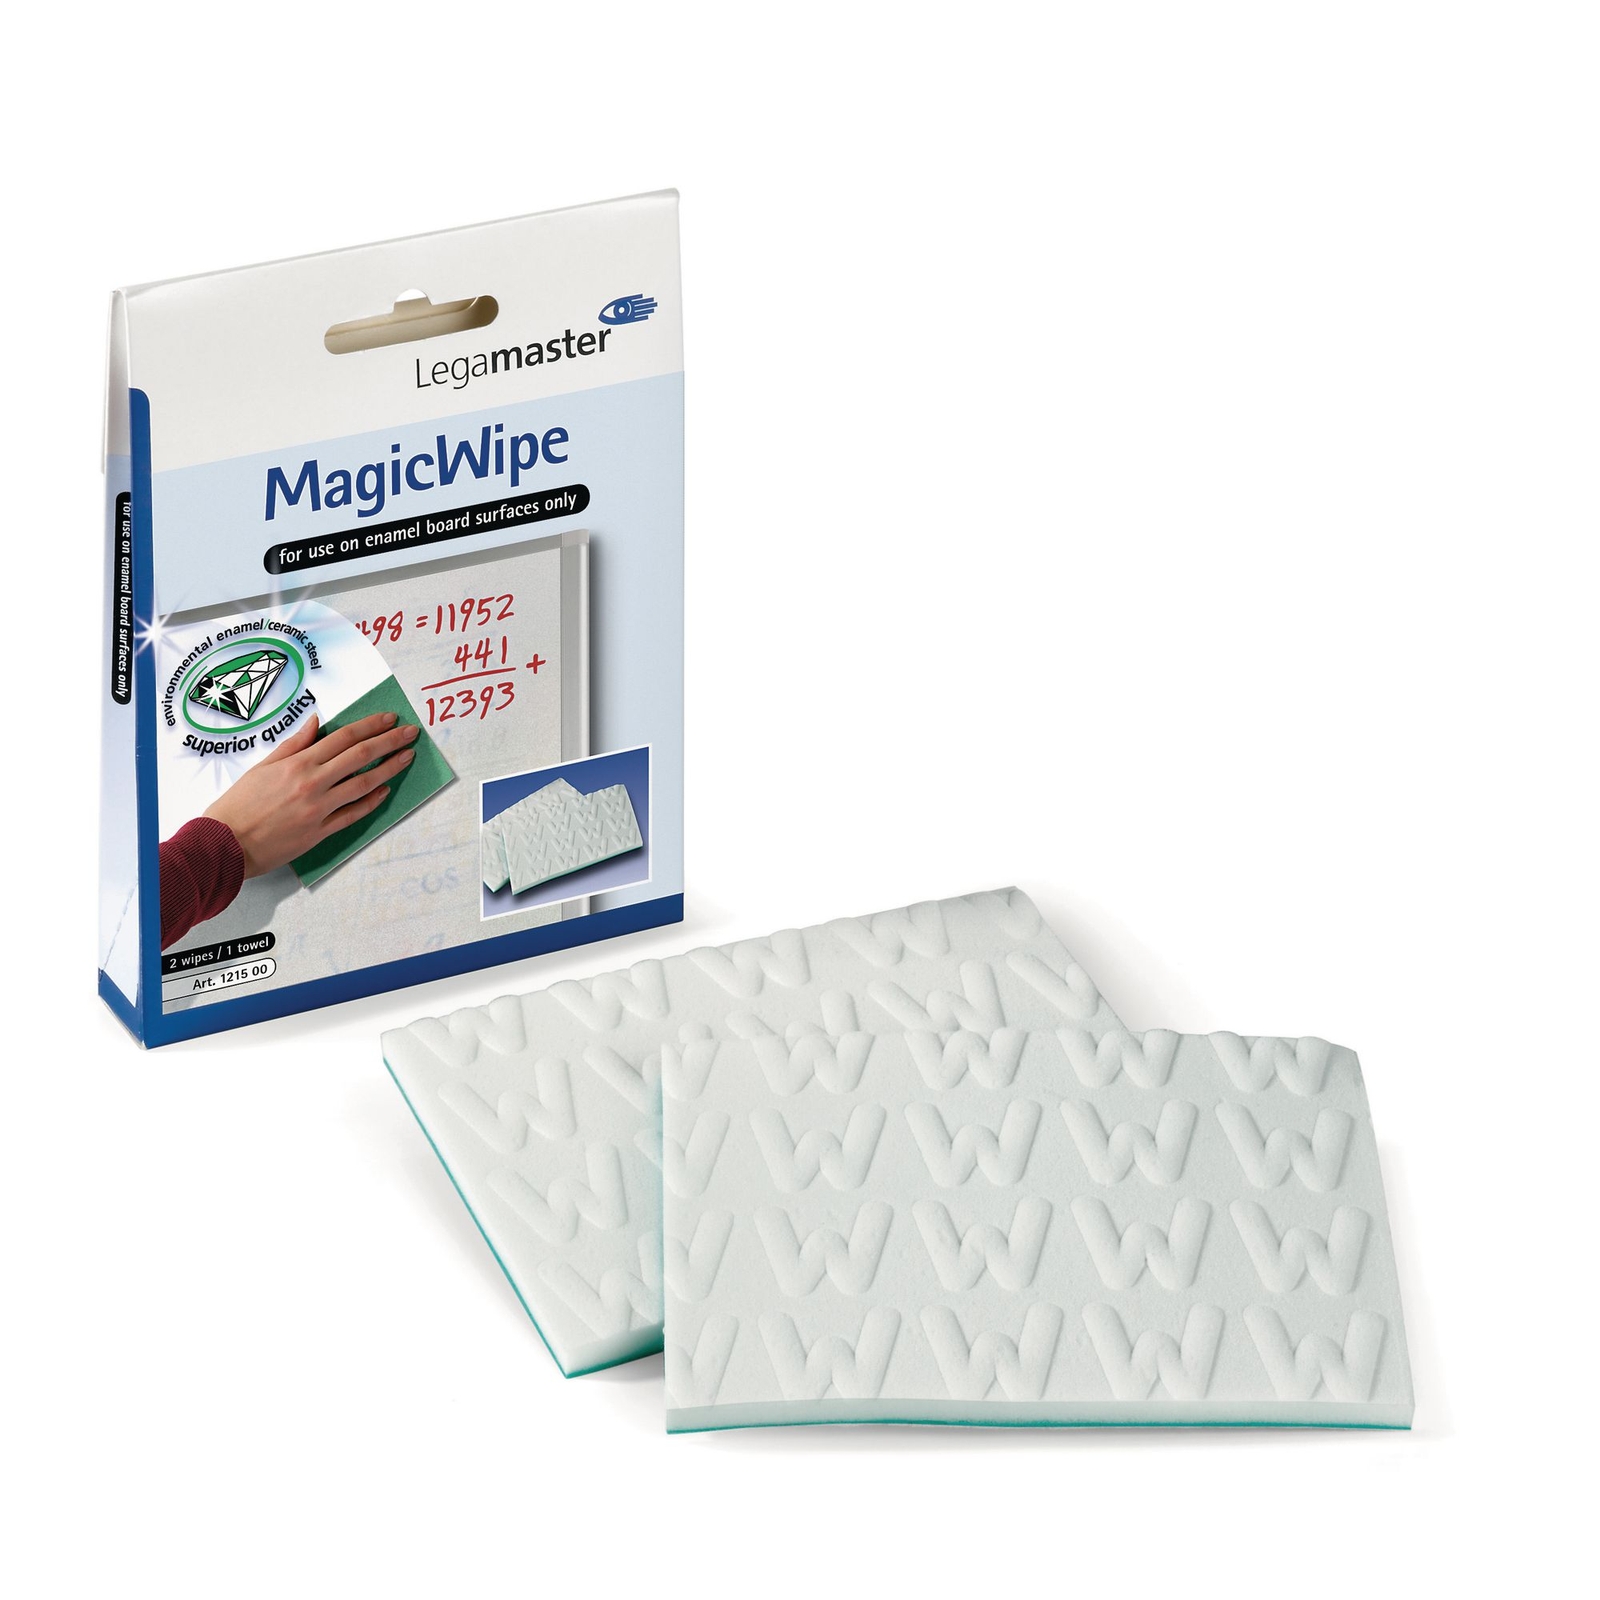 Legamaster MagicWipe Board Cleaner- Pack of 2